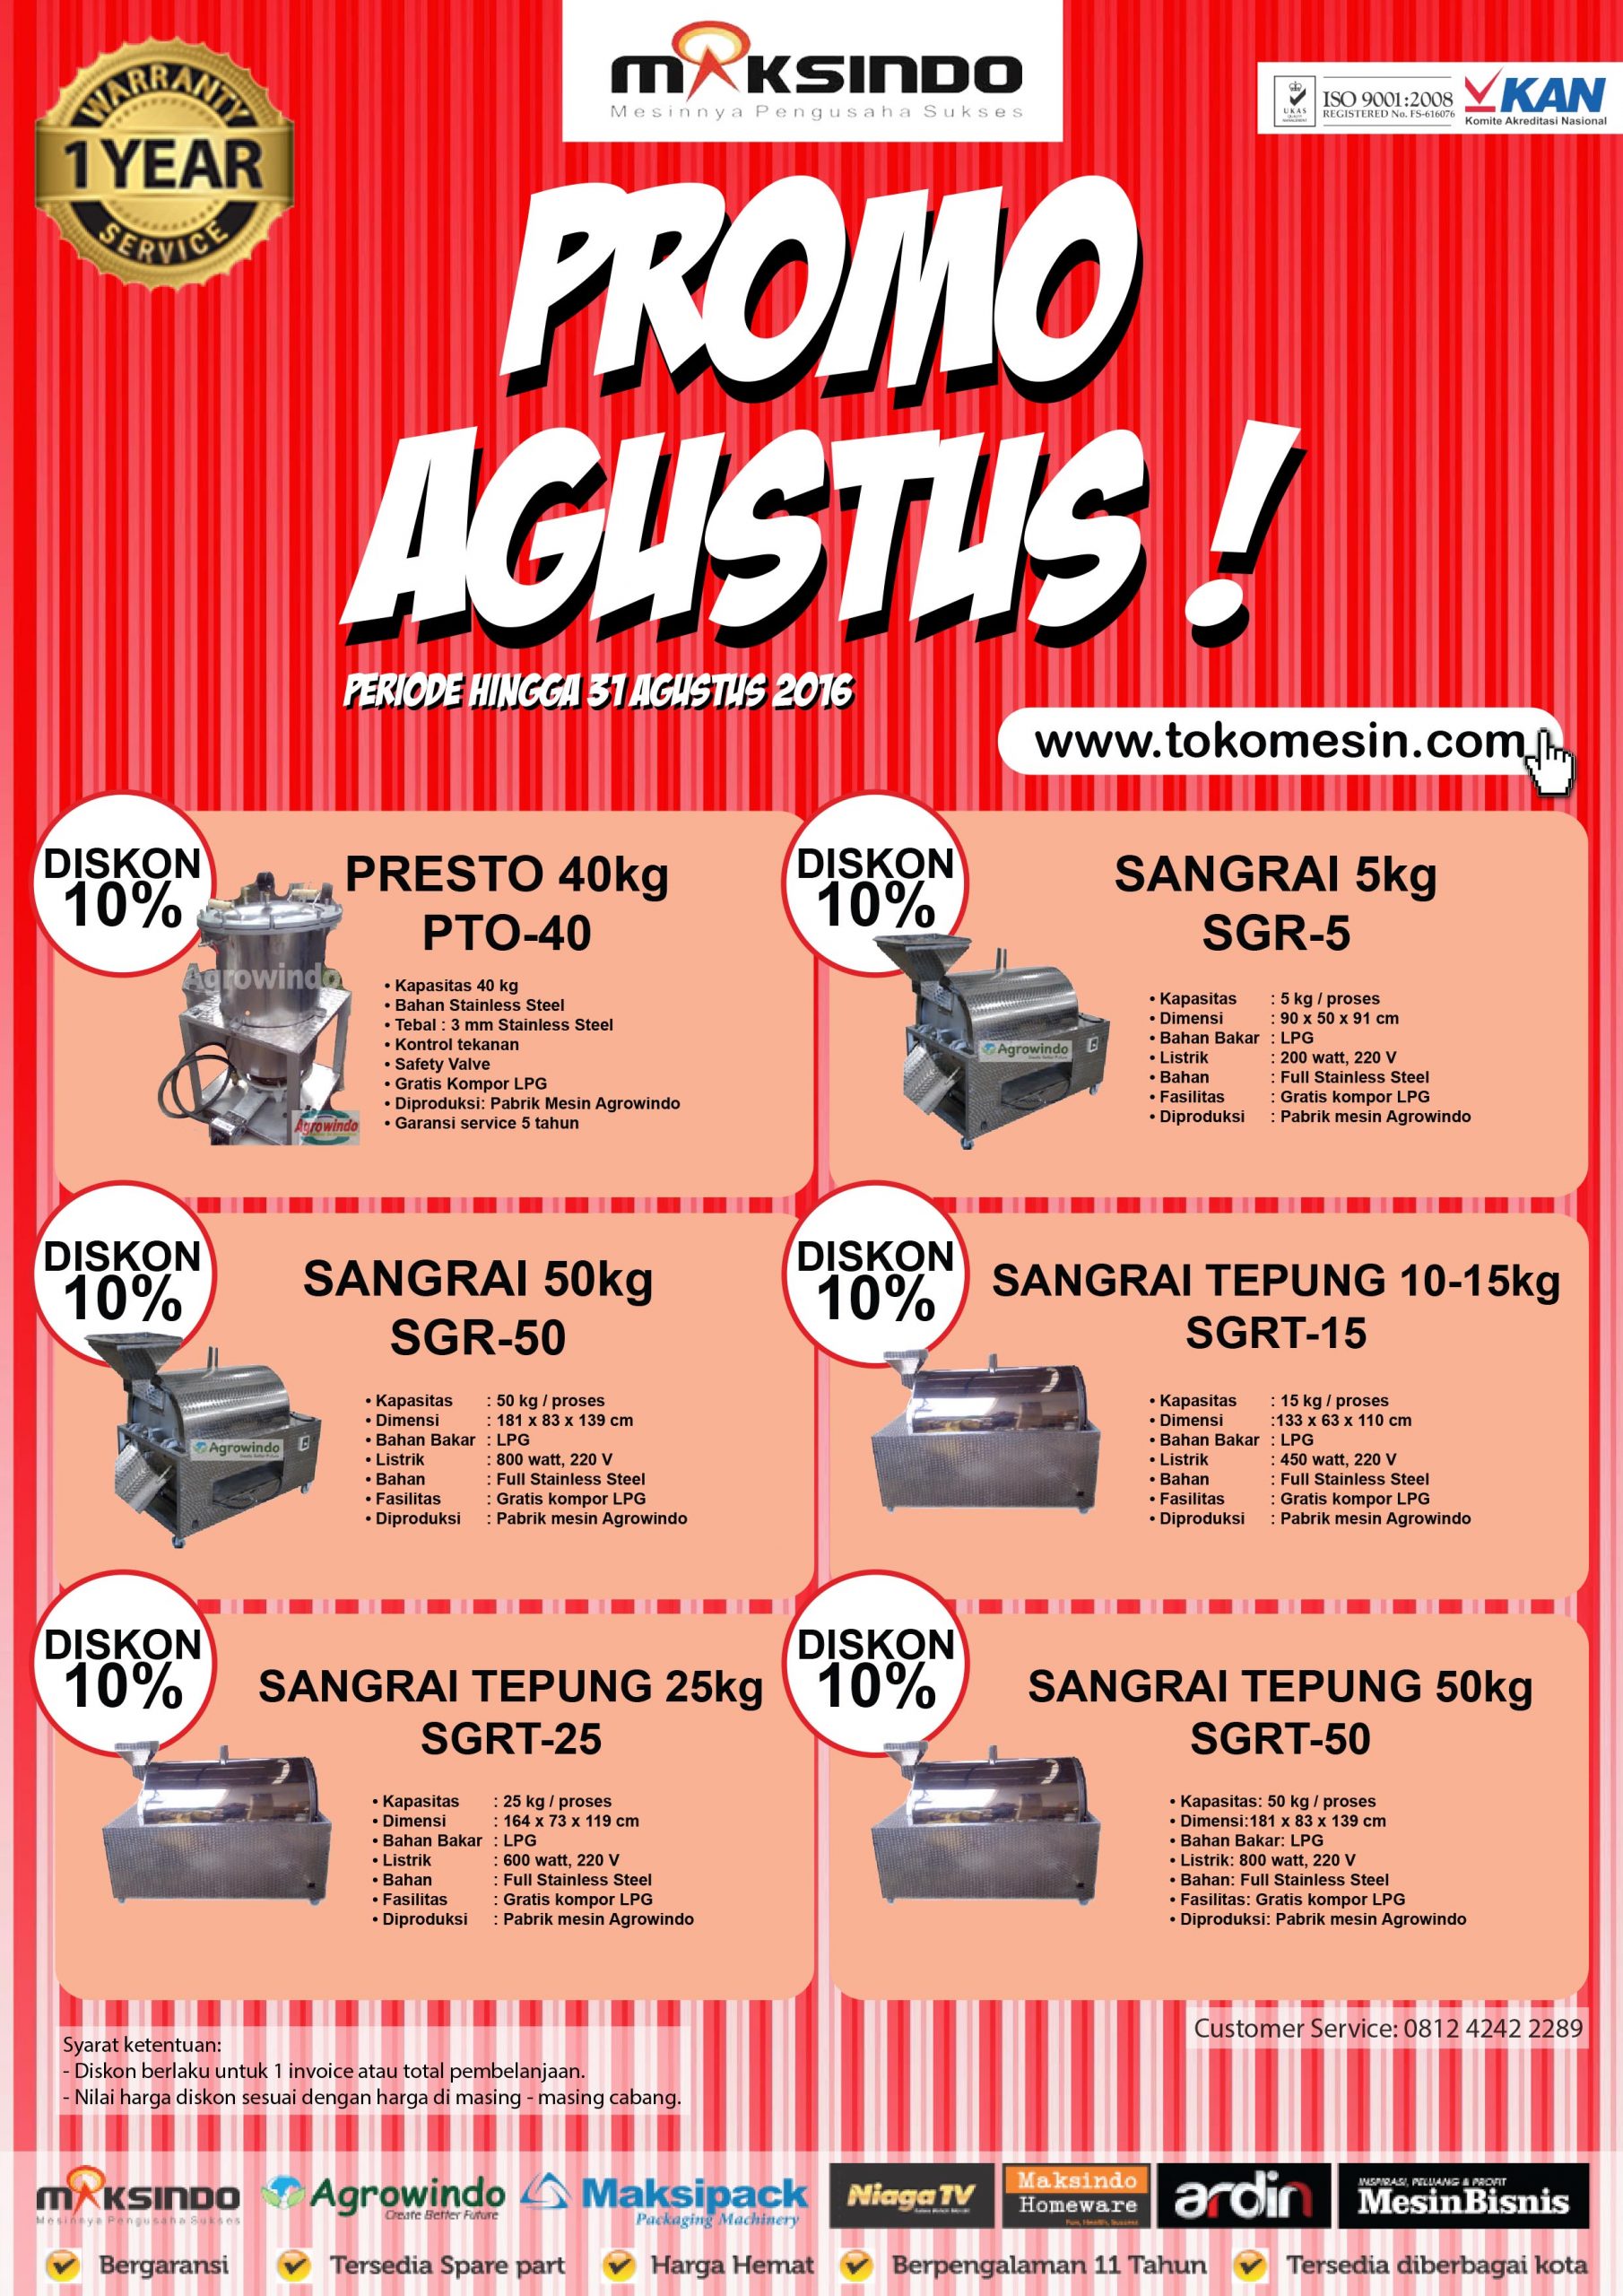 PROMO AGUSTUS UP TO 10%